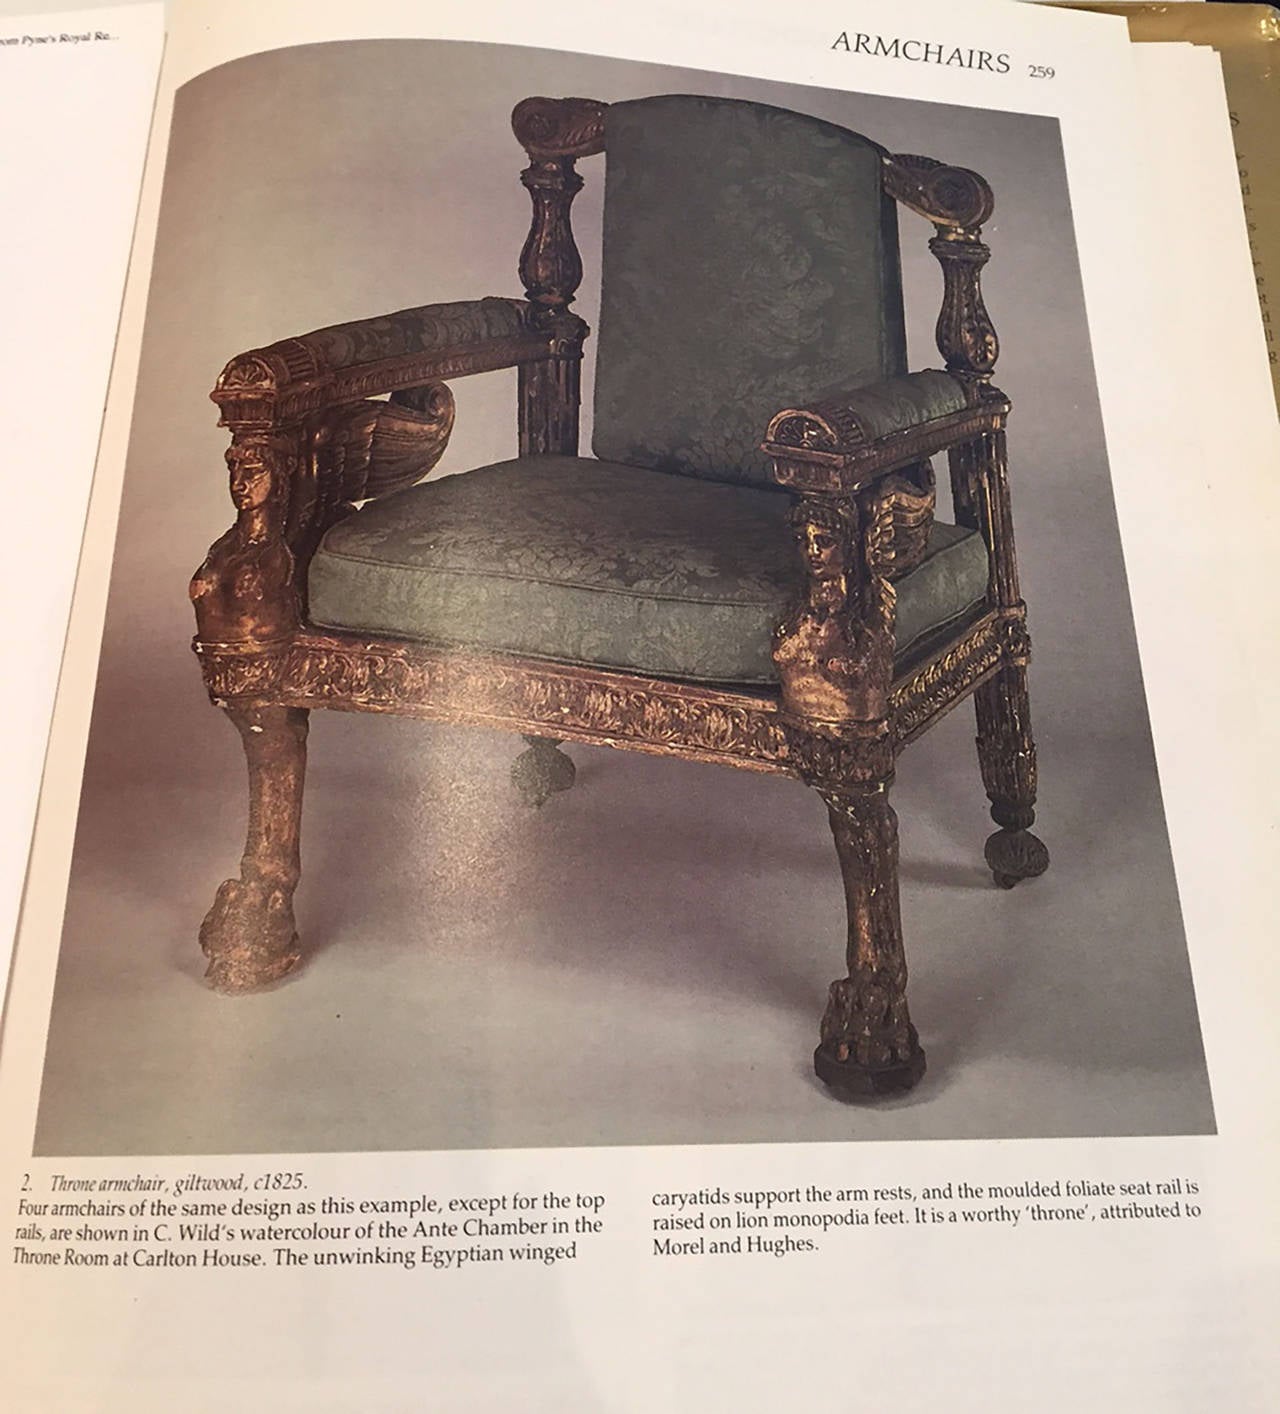 19th Century English Regency Gilt Carved Armchair by Morel & Hughes